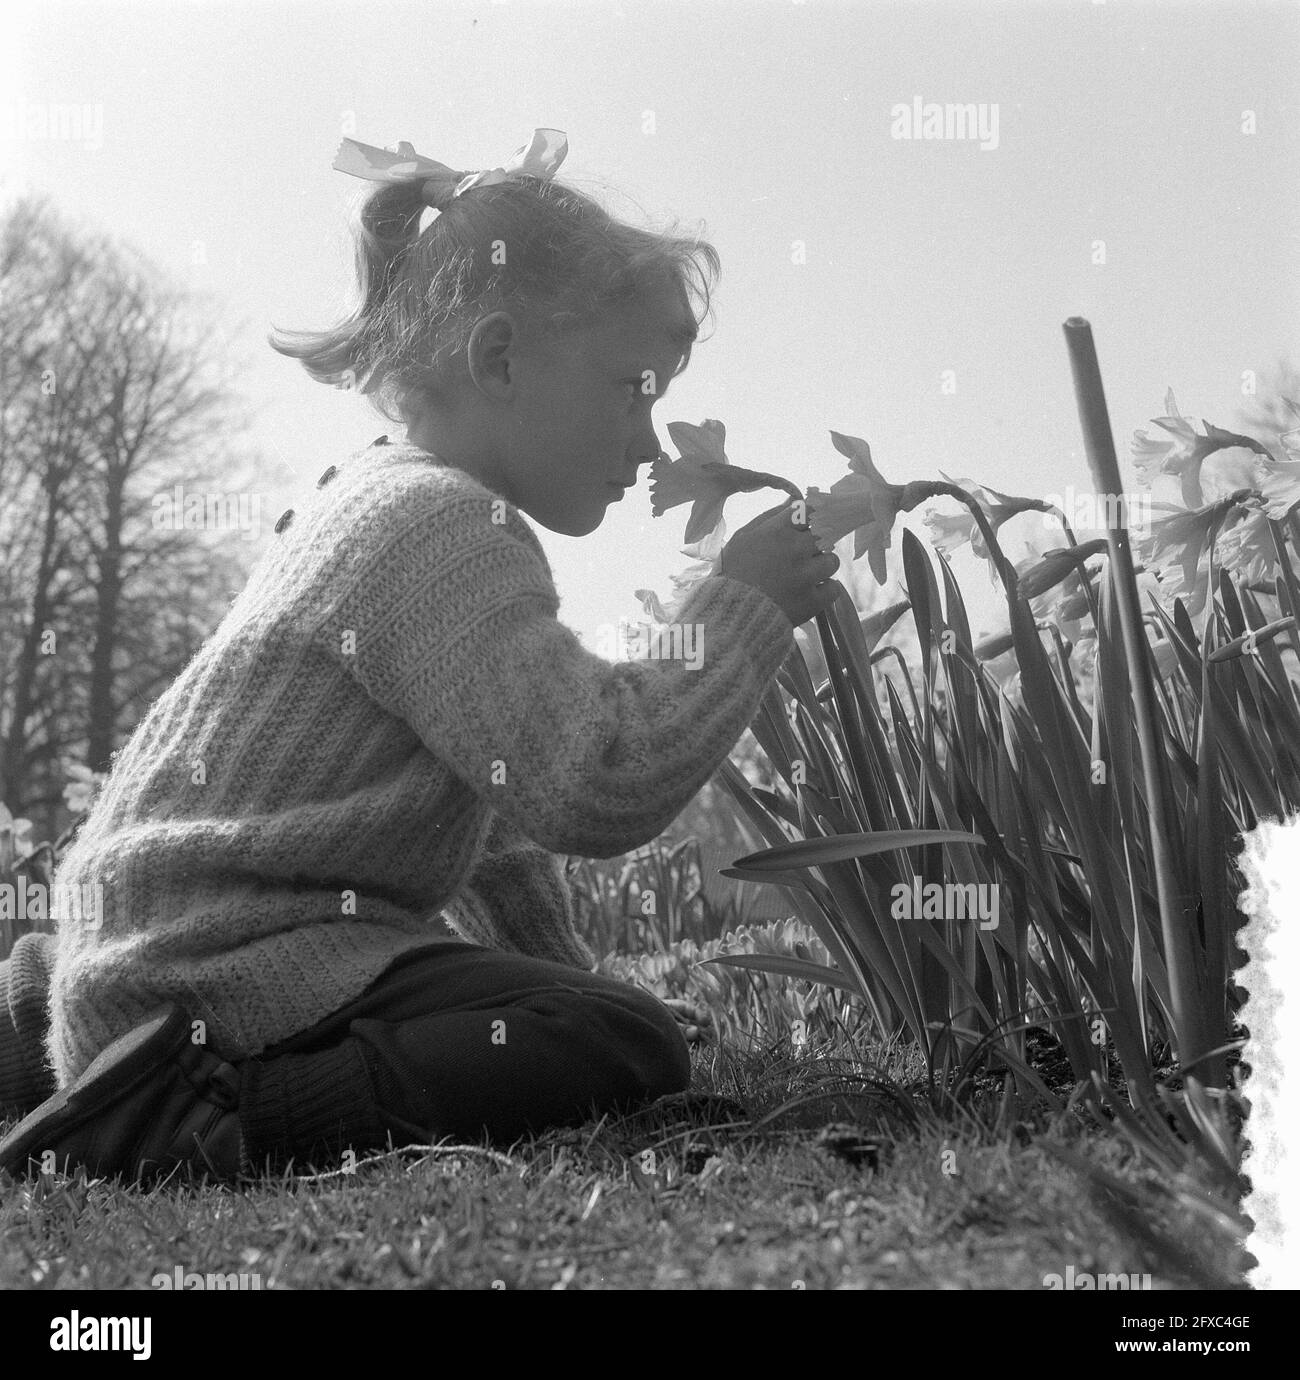 Children in daffodil fields in Keukenhof in Lisse, March 12, 1957, flowers, children, parks, The Netherlands, 20th century press agency photo, news to remember, documentary, historic photography 1945-1990, visual stories, human history of the Twentieth Century, capturing moments in time Stock Photo